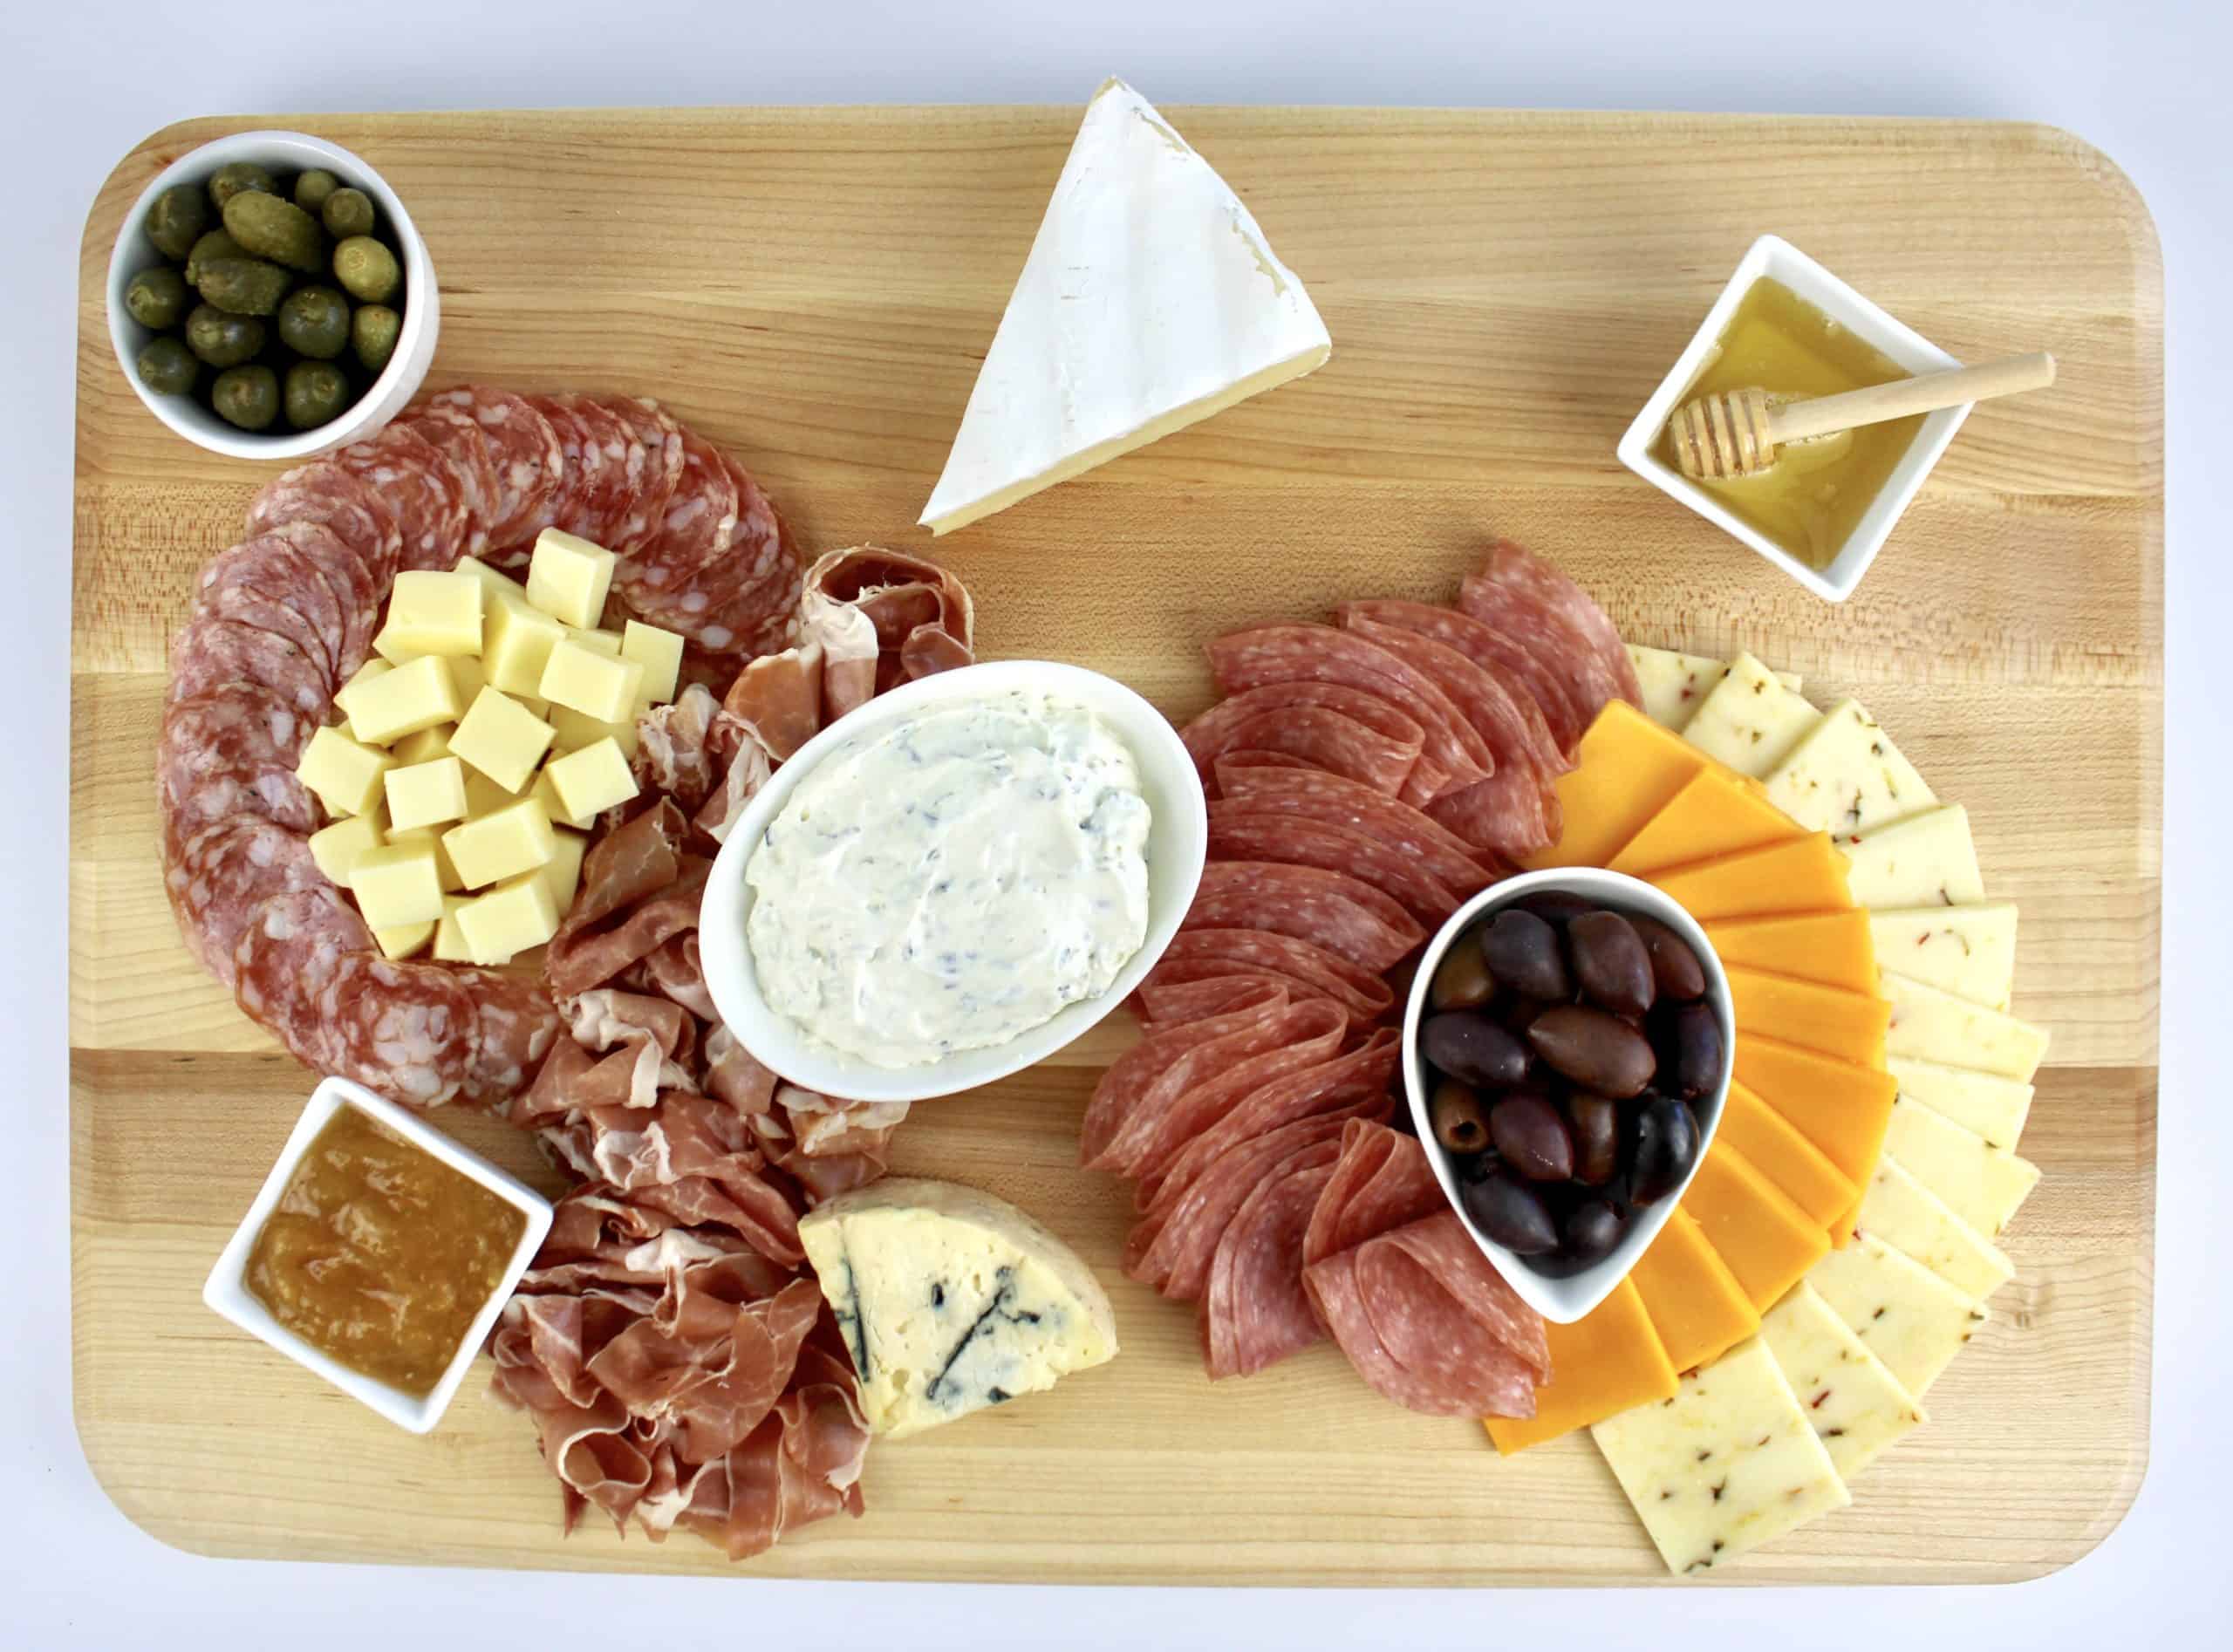 cheese board with meats and cheeses